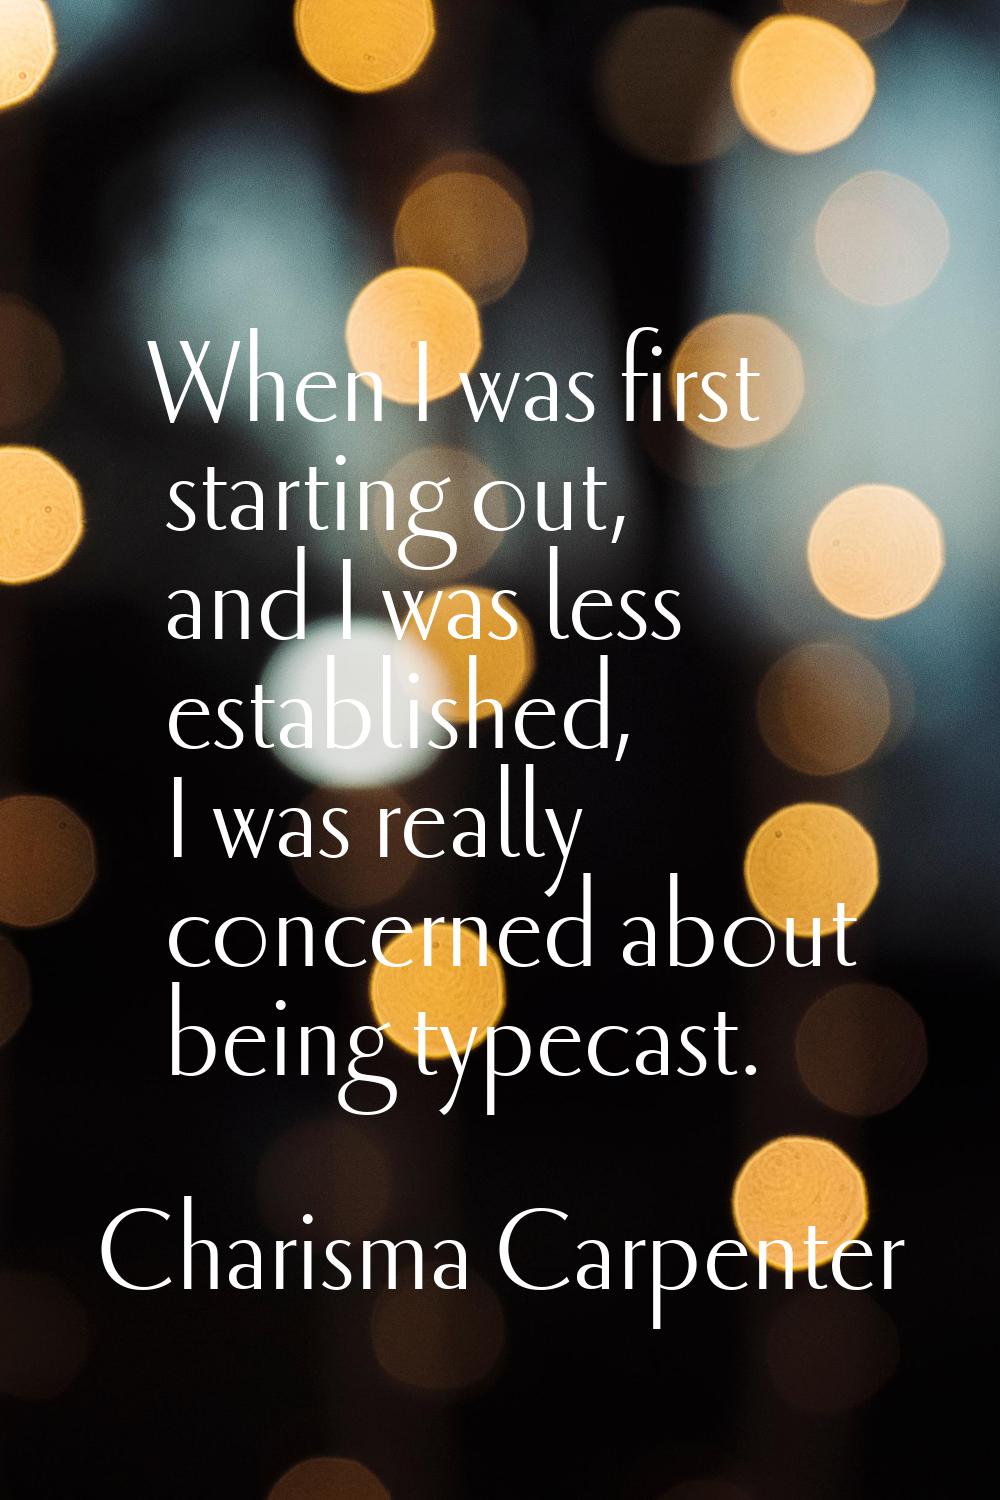 When I was first starting out, and I was less established, I was really concerned about being typec